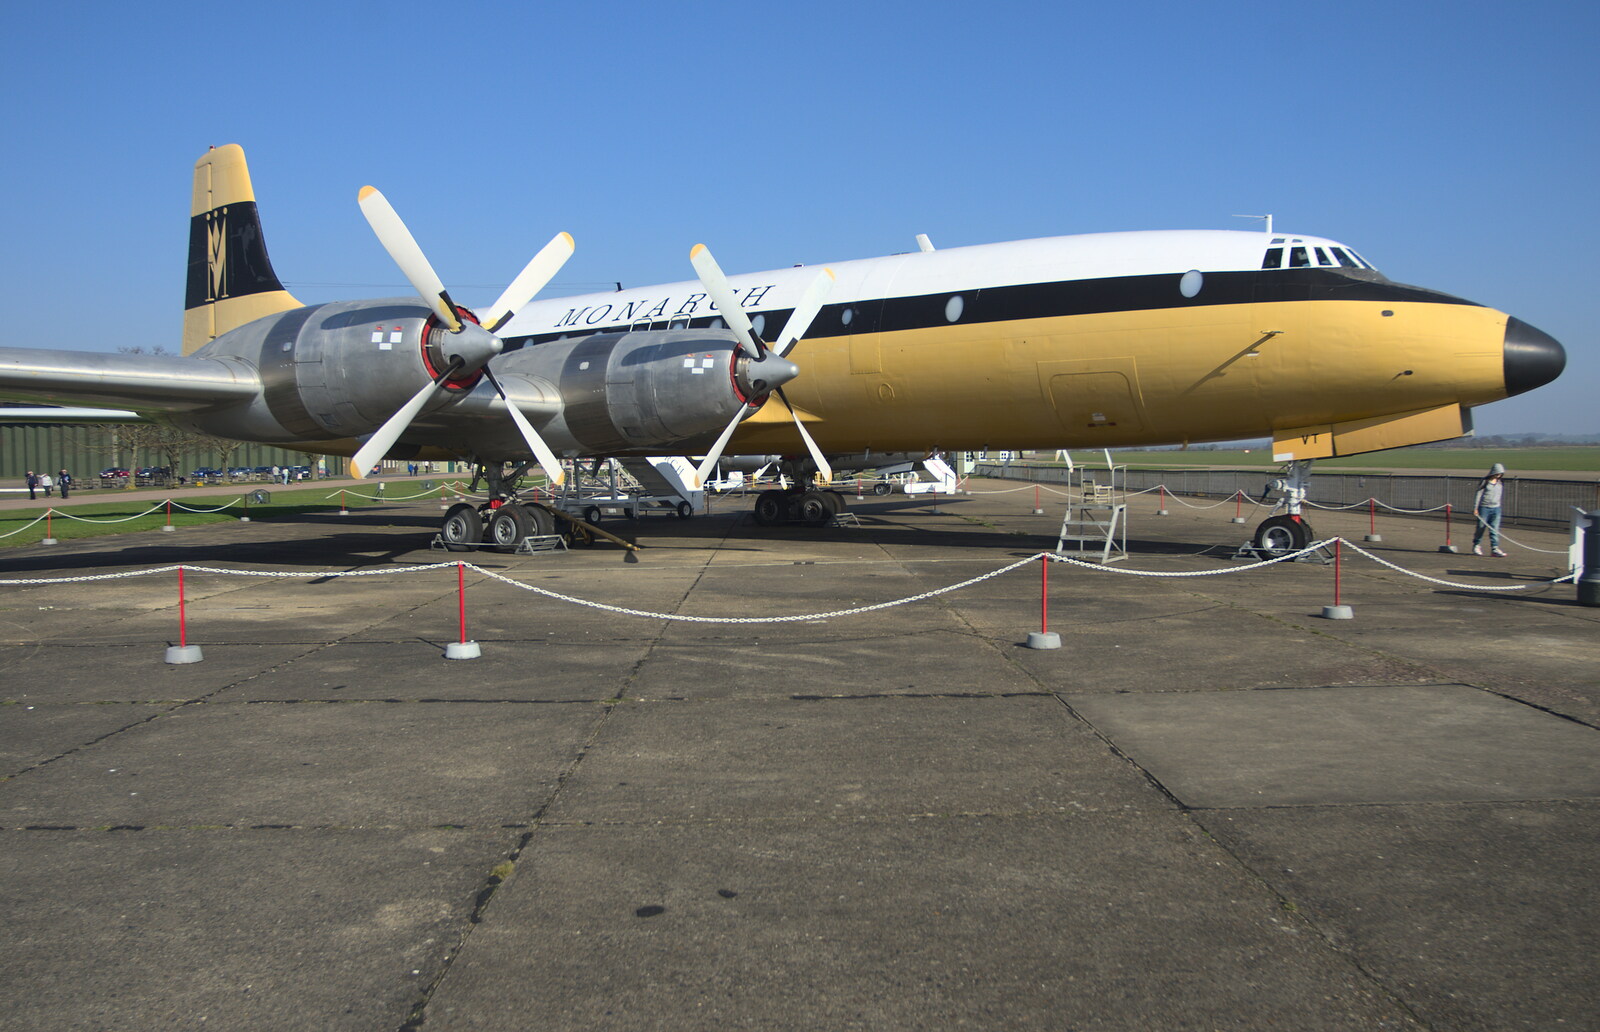 A Monarch Airline's Bristol 175 Britannia from A Day Out at Duxford, Cambridgeshire - 9th March 2014